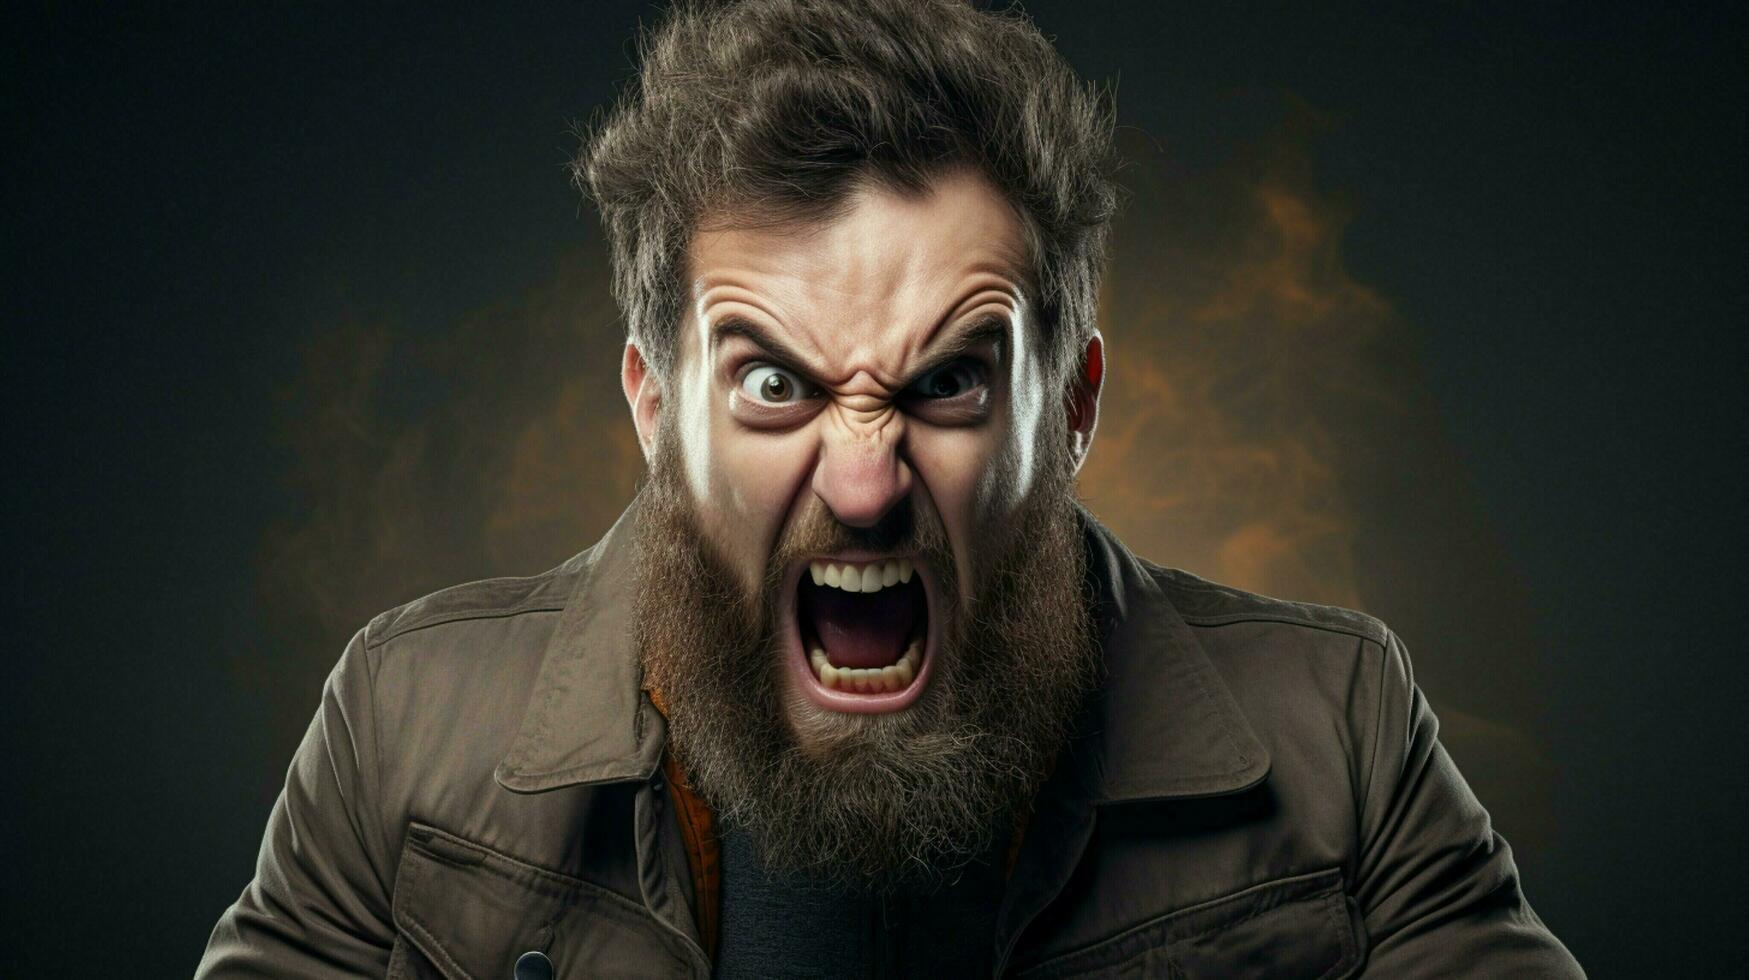 angry young adult with beard and aggression photo